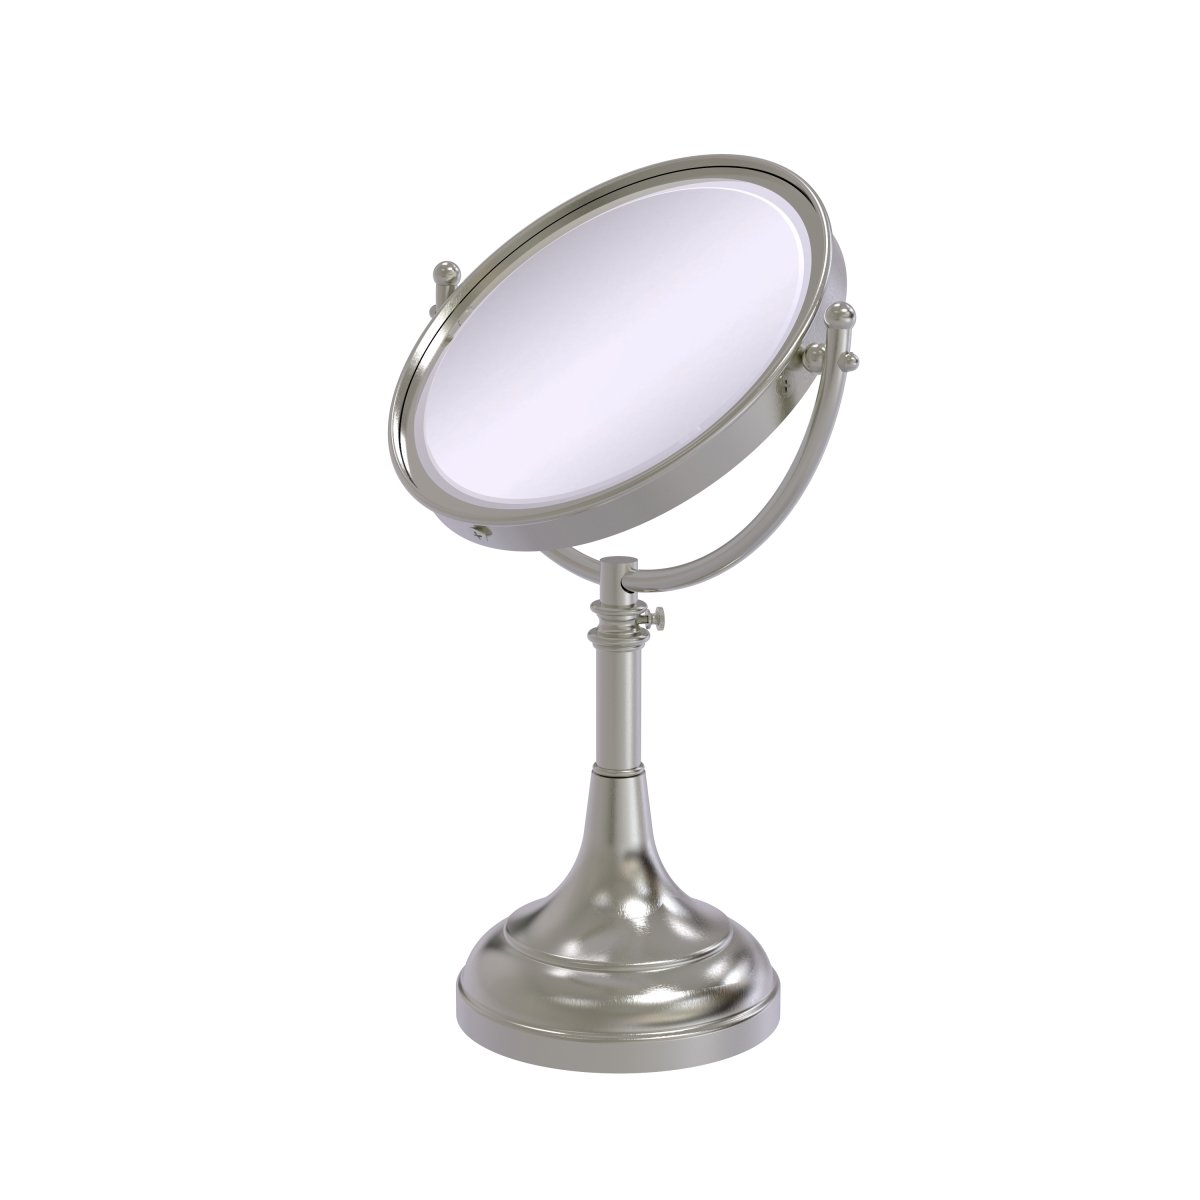 Picture of Allied Brass DM-1-2X-SN 8 in. Height Adjustable Vanity Top Make-Up Mirror 2X Magnification, Satin Nickel